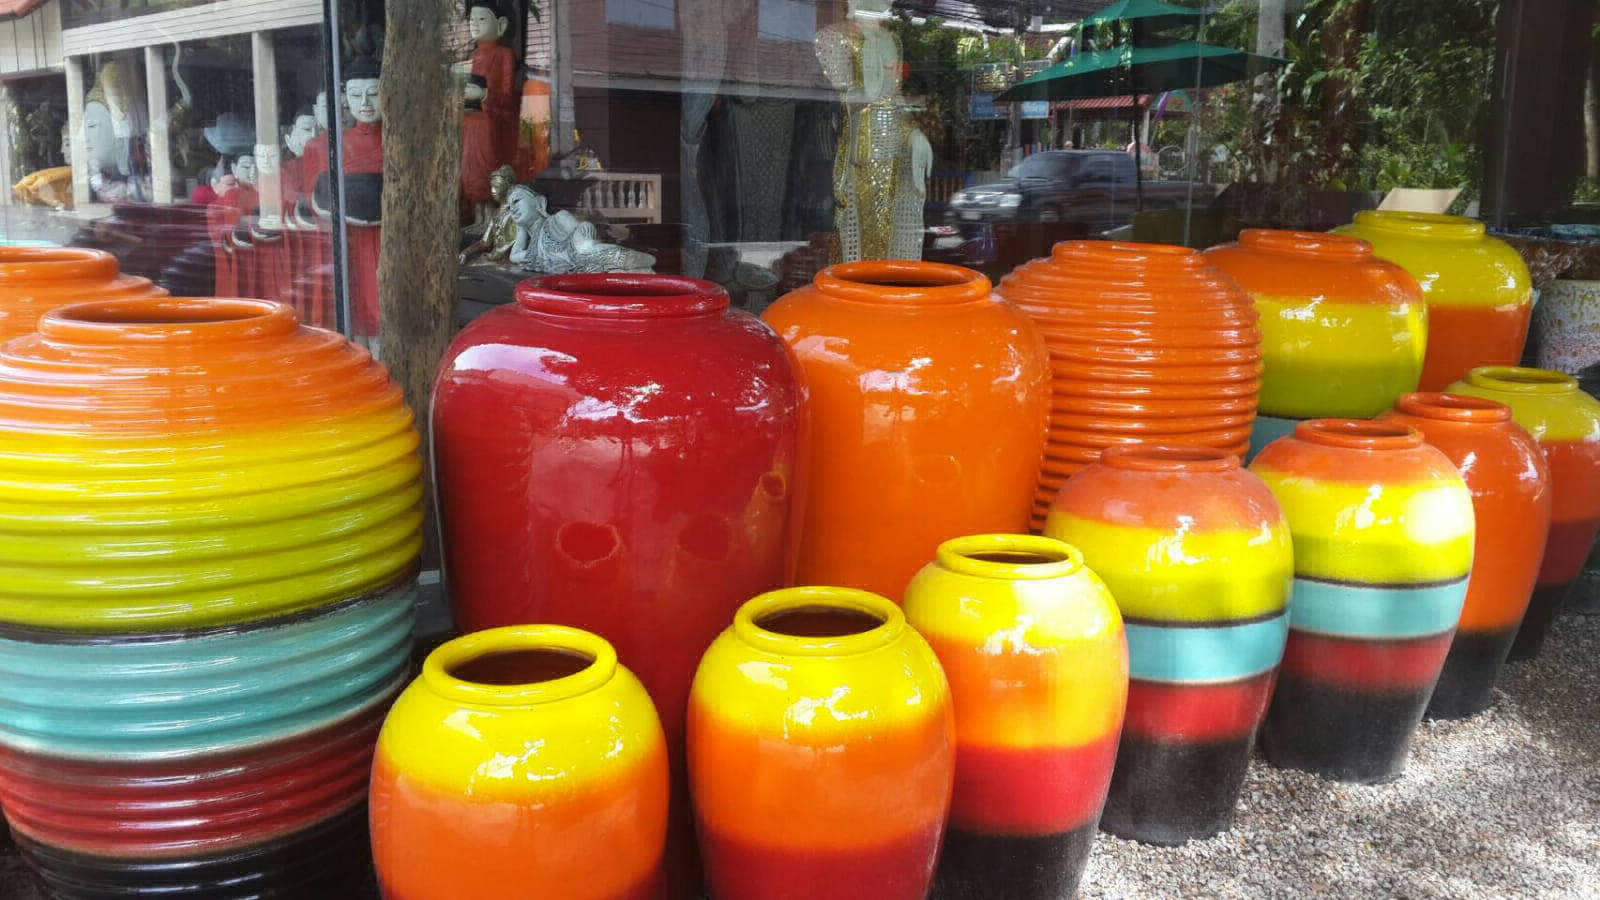 Pots and large vases for the outdoors.